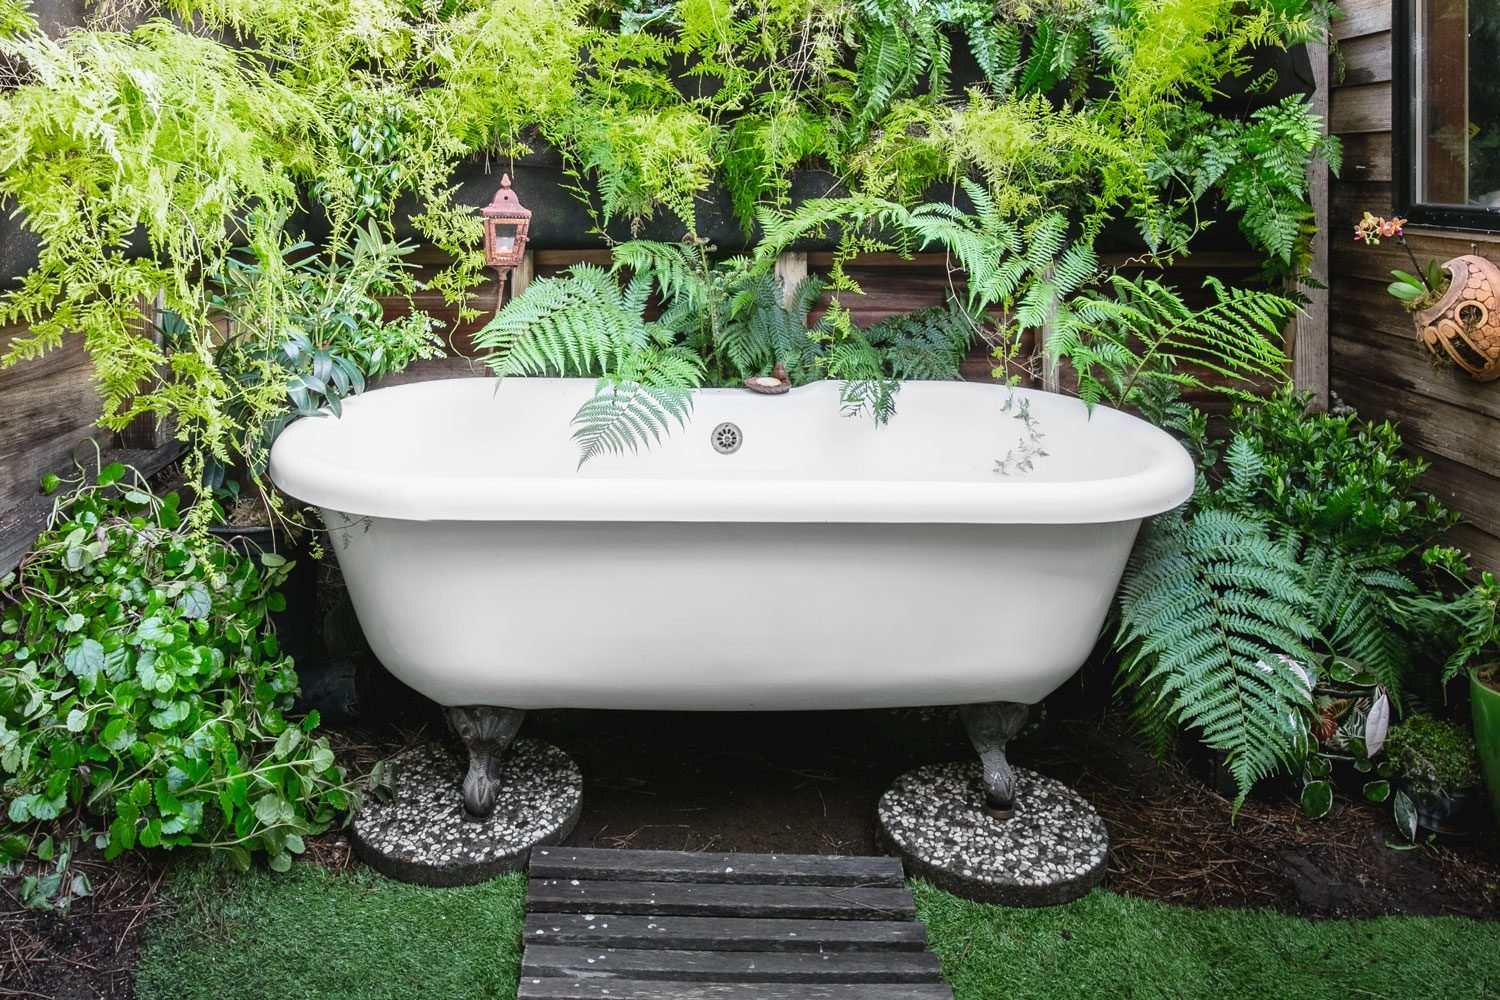 Bathtub surrounded by ferns outdoors in backyard